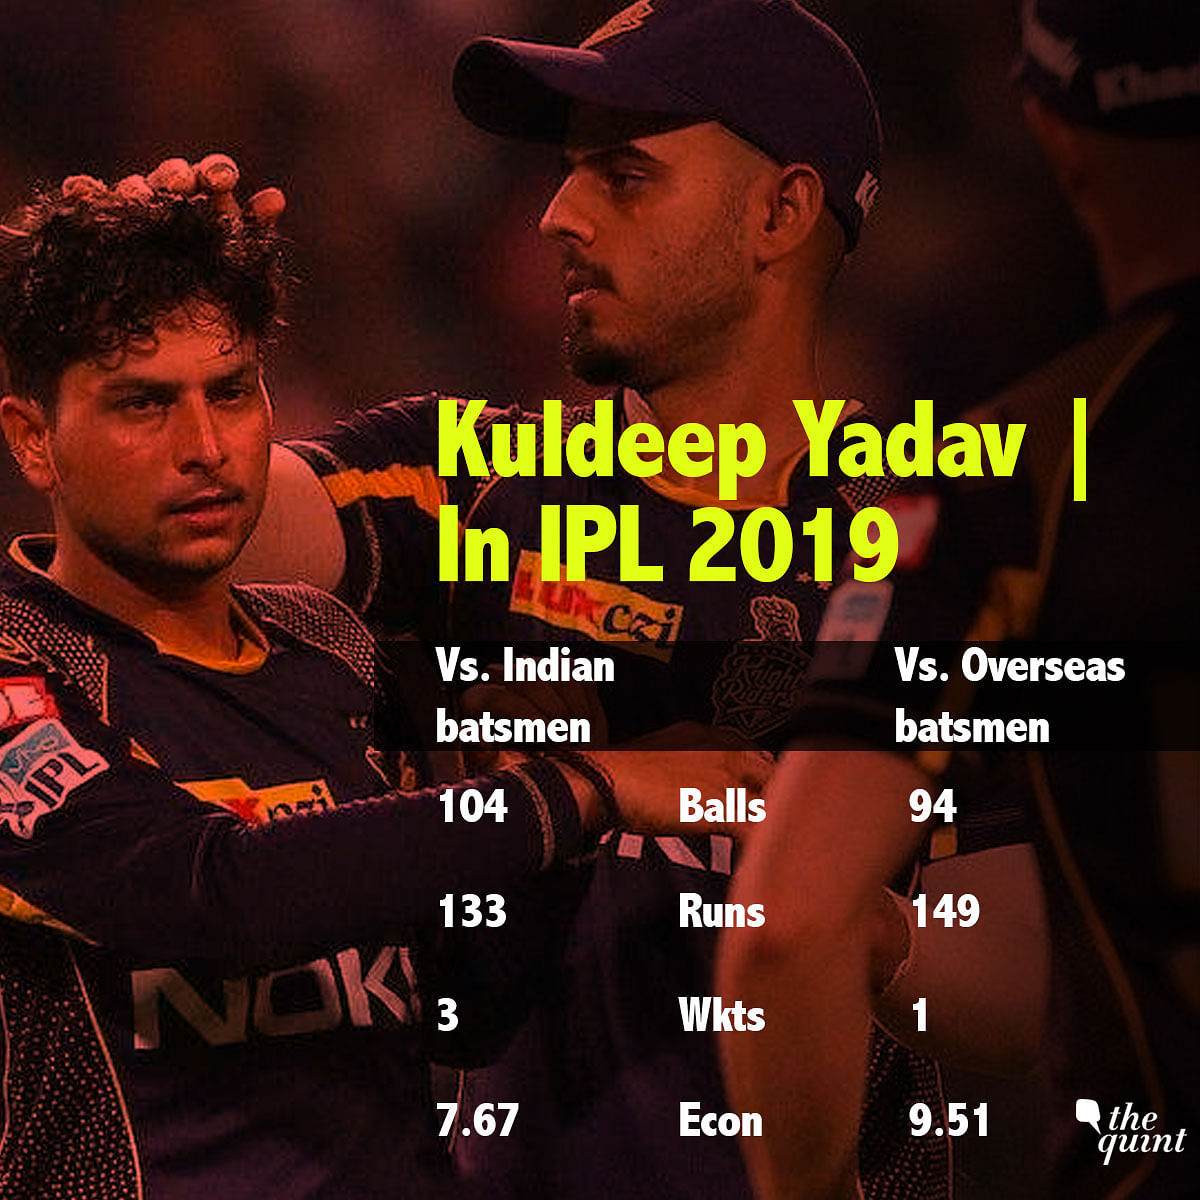 Never previously, not even in a completed IPL season, had Kuldeep Yadav gone wicket-less in 6 matches.